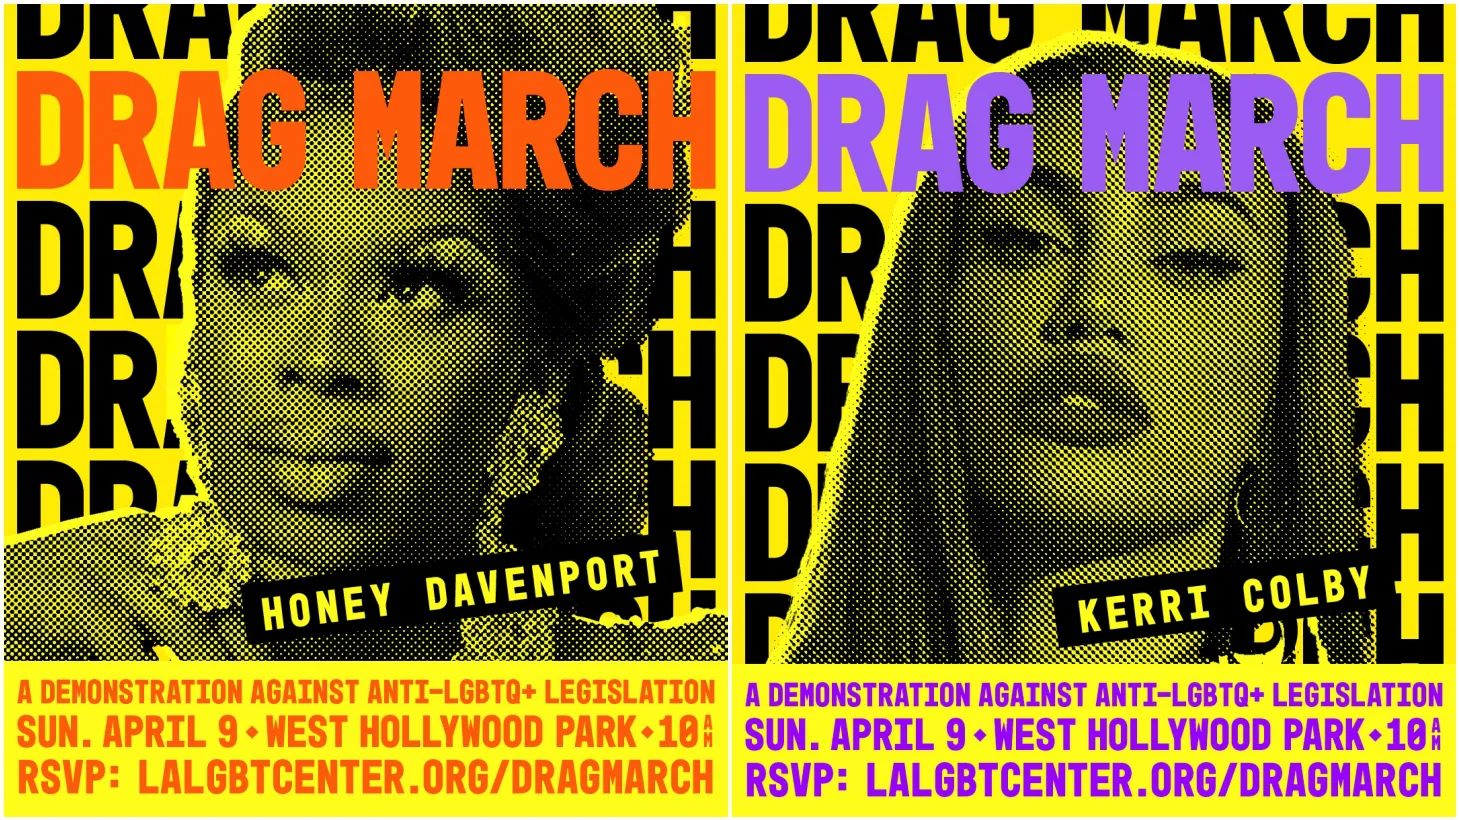 Drag artists Honey Davenport and Kerri Colby, both former competitors on the show “RuPaul’s Drag Race,” will perform at Drag March LA on Easter Sunday in protest of anti-LGBTQ legislation nationwide.